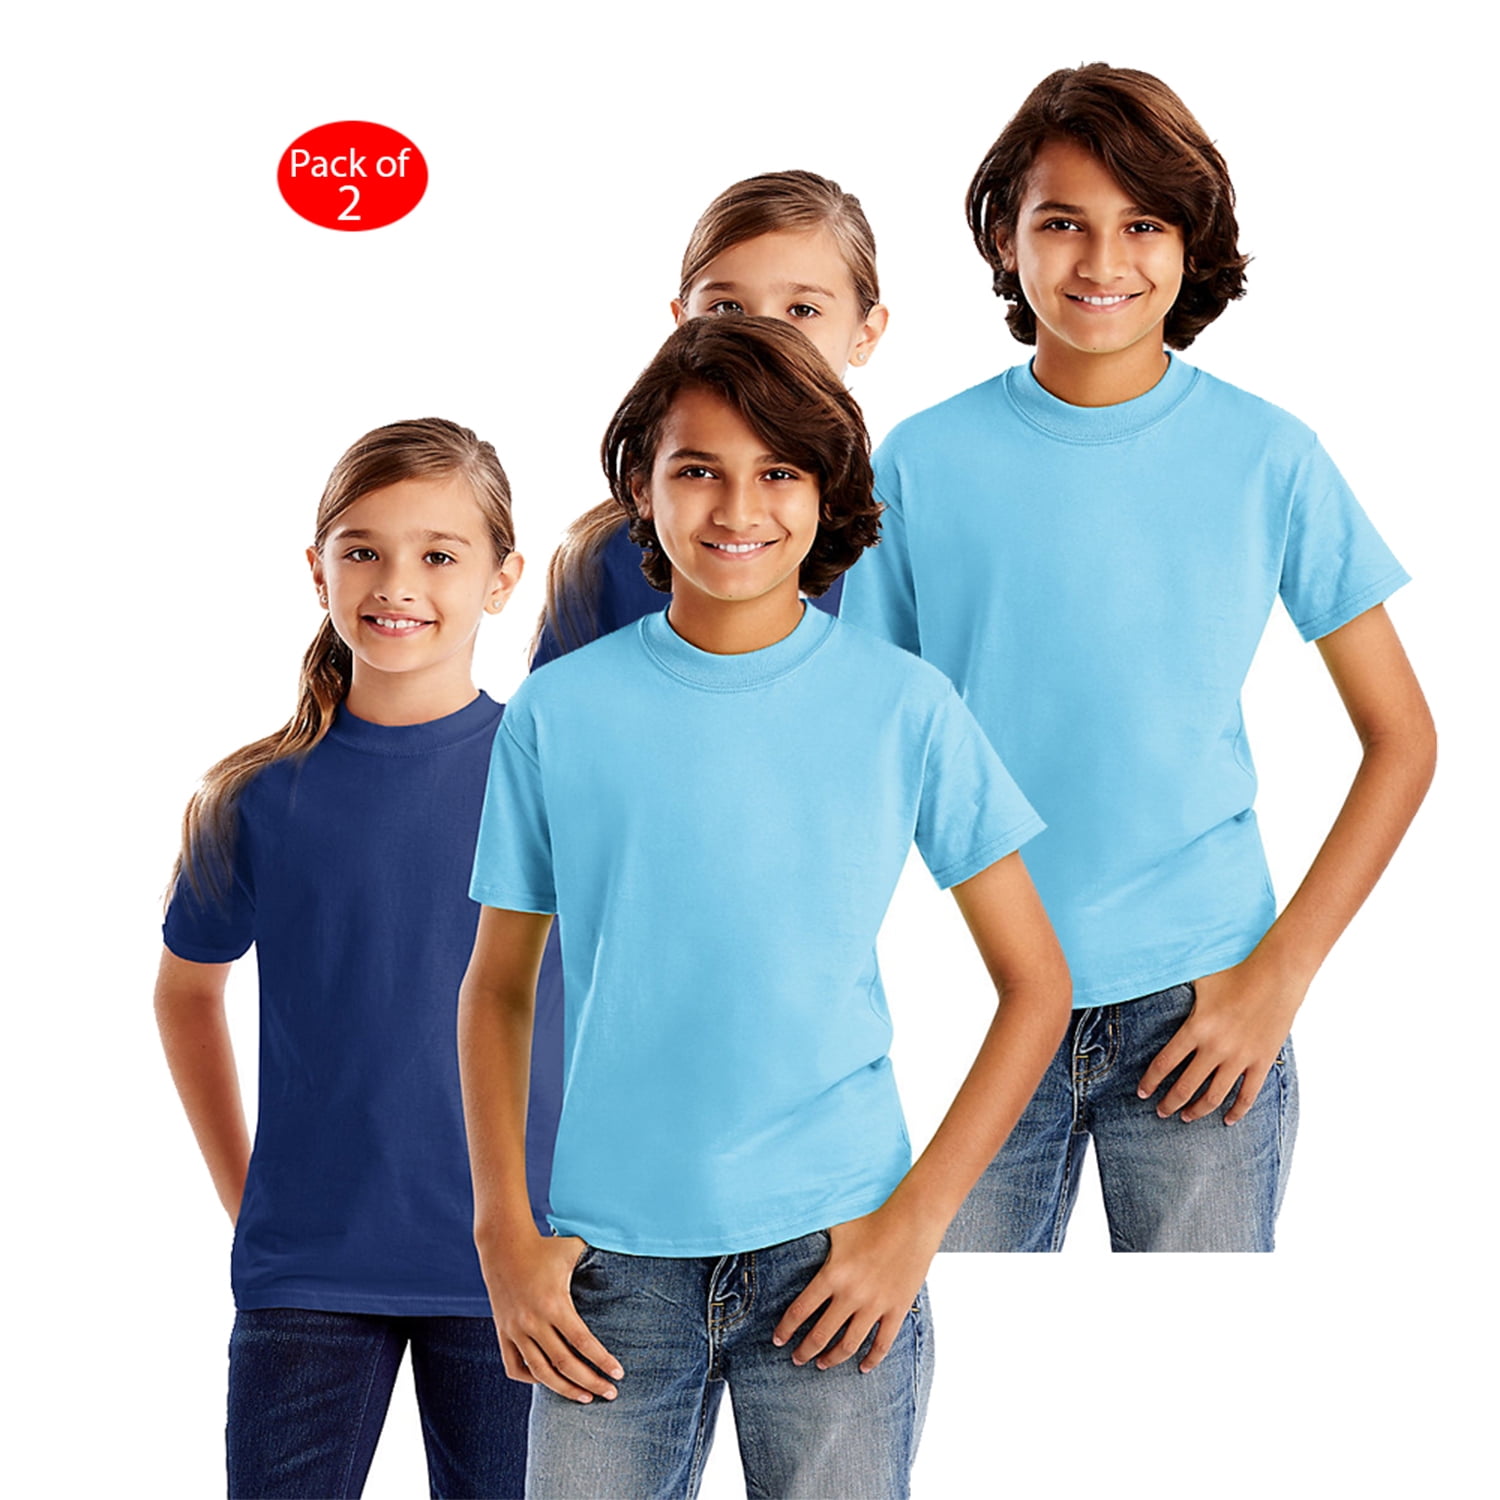 FREAKY  New Kids Boys FREAKY T-shirt 100% Cotton Tops  Age 2-12 Years 